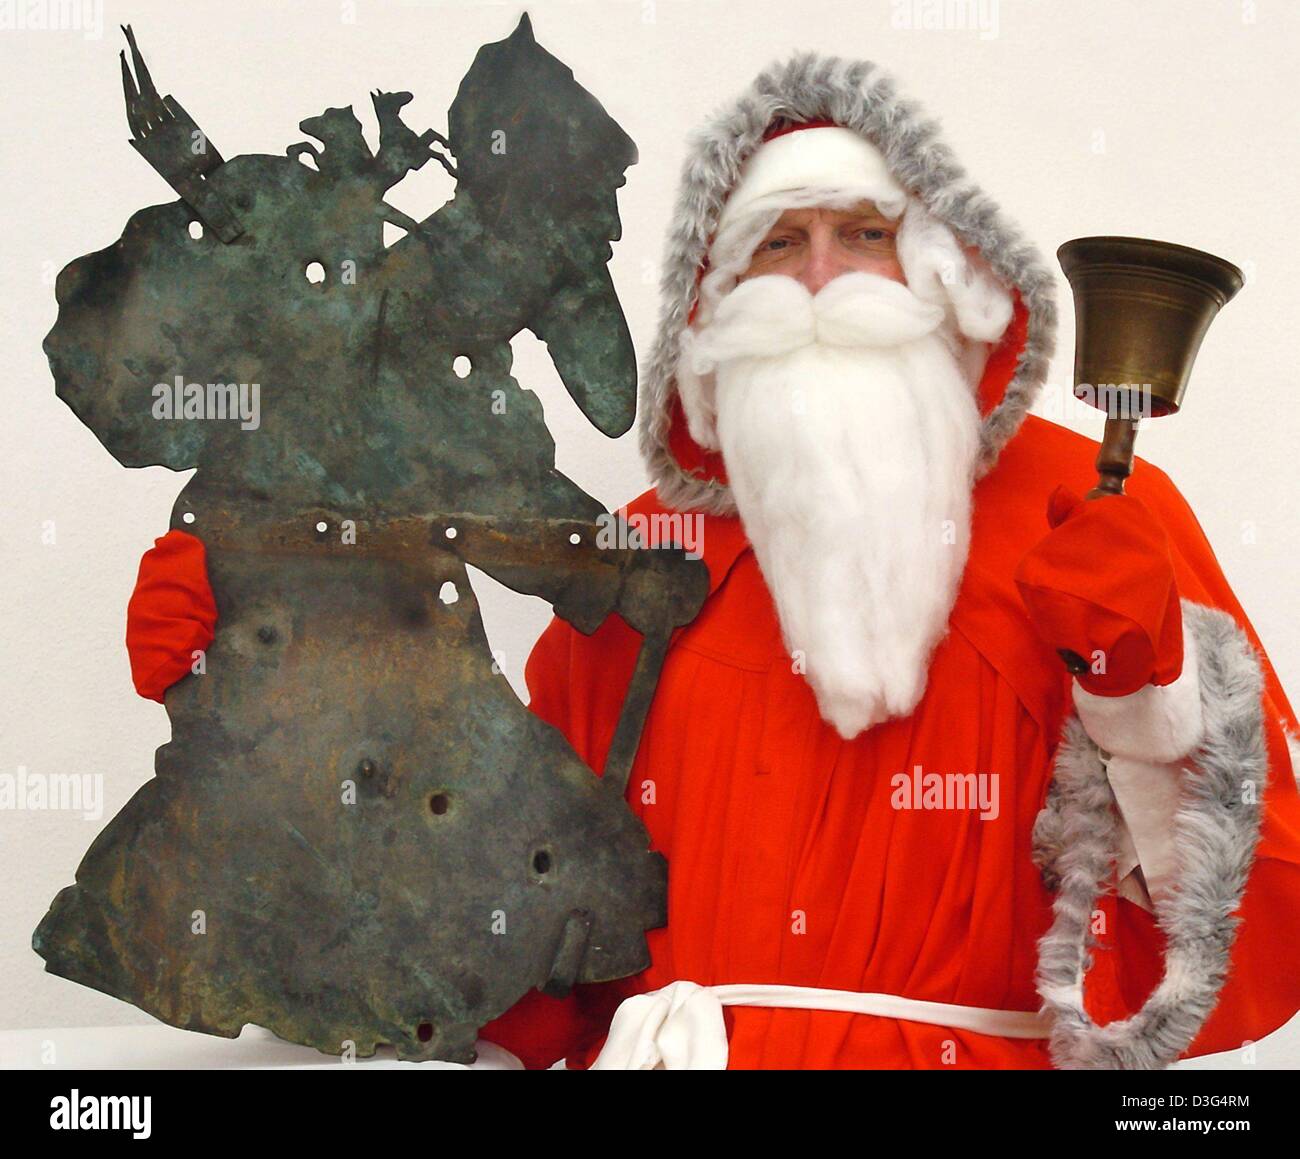 (dpa) - The Mayor, Roland Halang, dressed up as Santa Claus holds up a century-old weather vane in the shape of 'servant Rupprecht' (Knecht Rupprecht) in Ilberstedt, Germany, 8 December 2003. According to research, the figure of Knecht Rupprecht originates from Ilberstedt. 1000 years ago in this town, a priest of the name Rupprecht or Rupert is said to have cursed a group of 18 pag Stock Photo